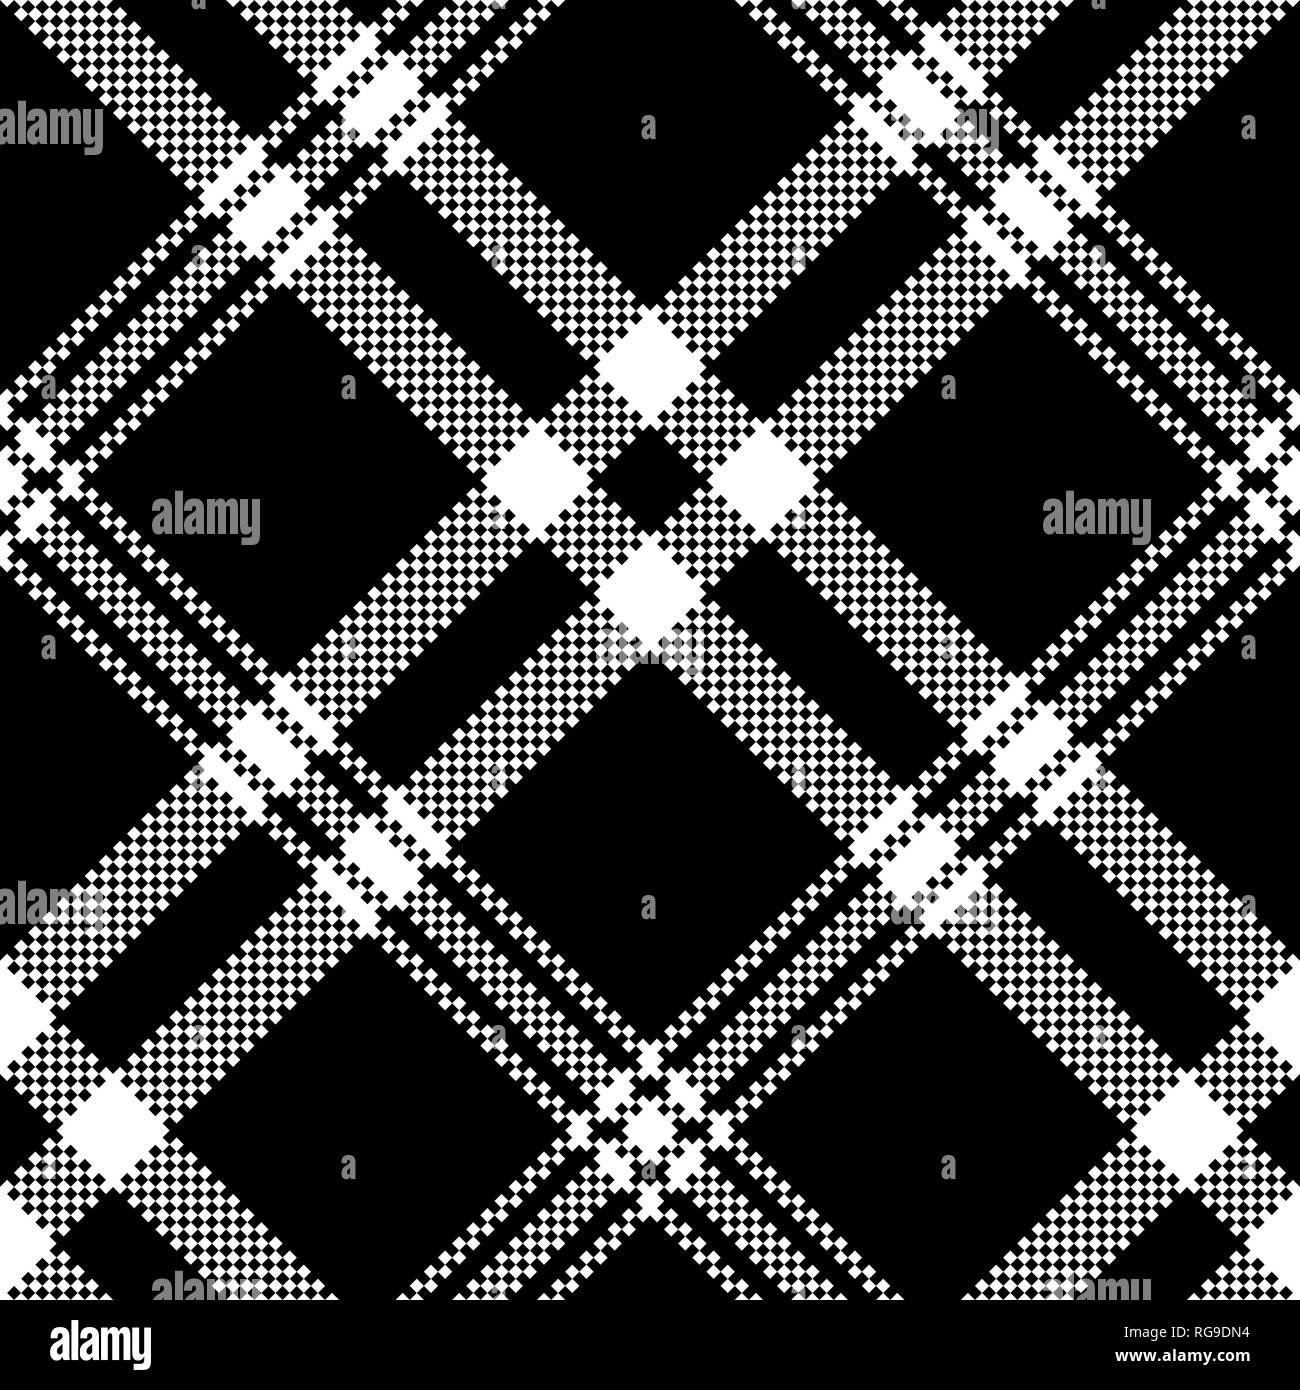 Black white simple check plaid seamless pattern. Vector illustration. Stock Vector